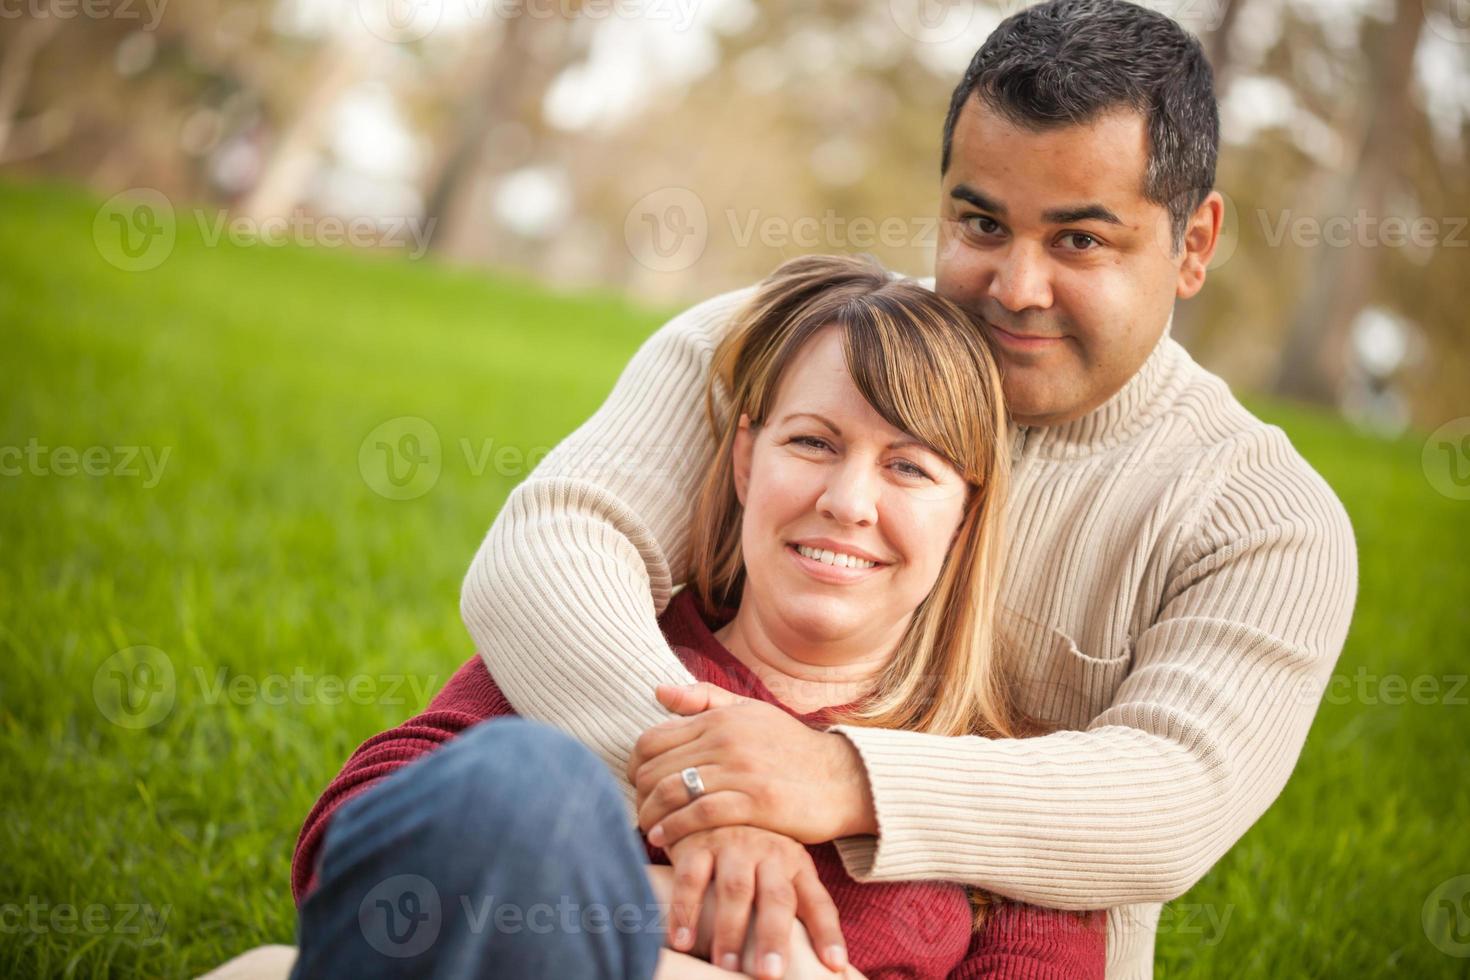 Attractive Mixed Race Couple Portrait in the Park photo